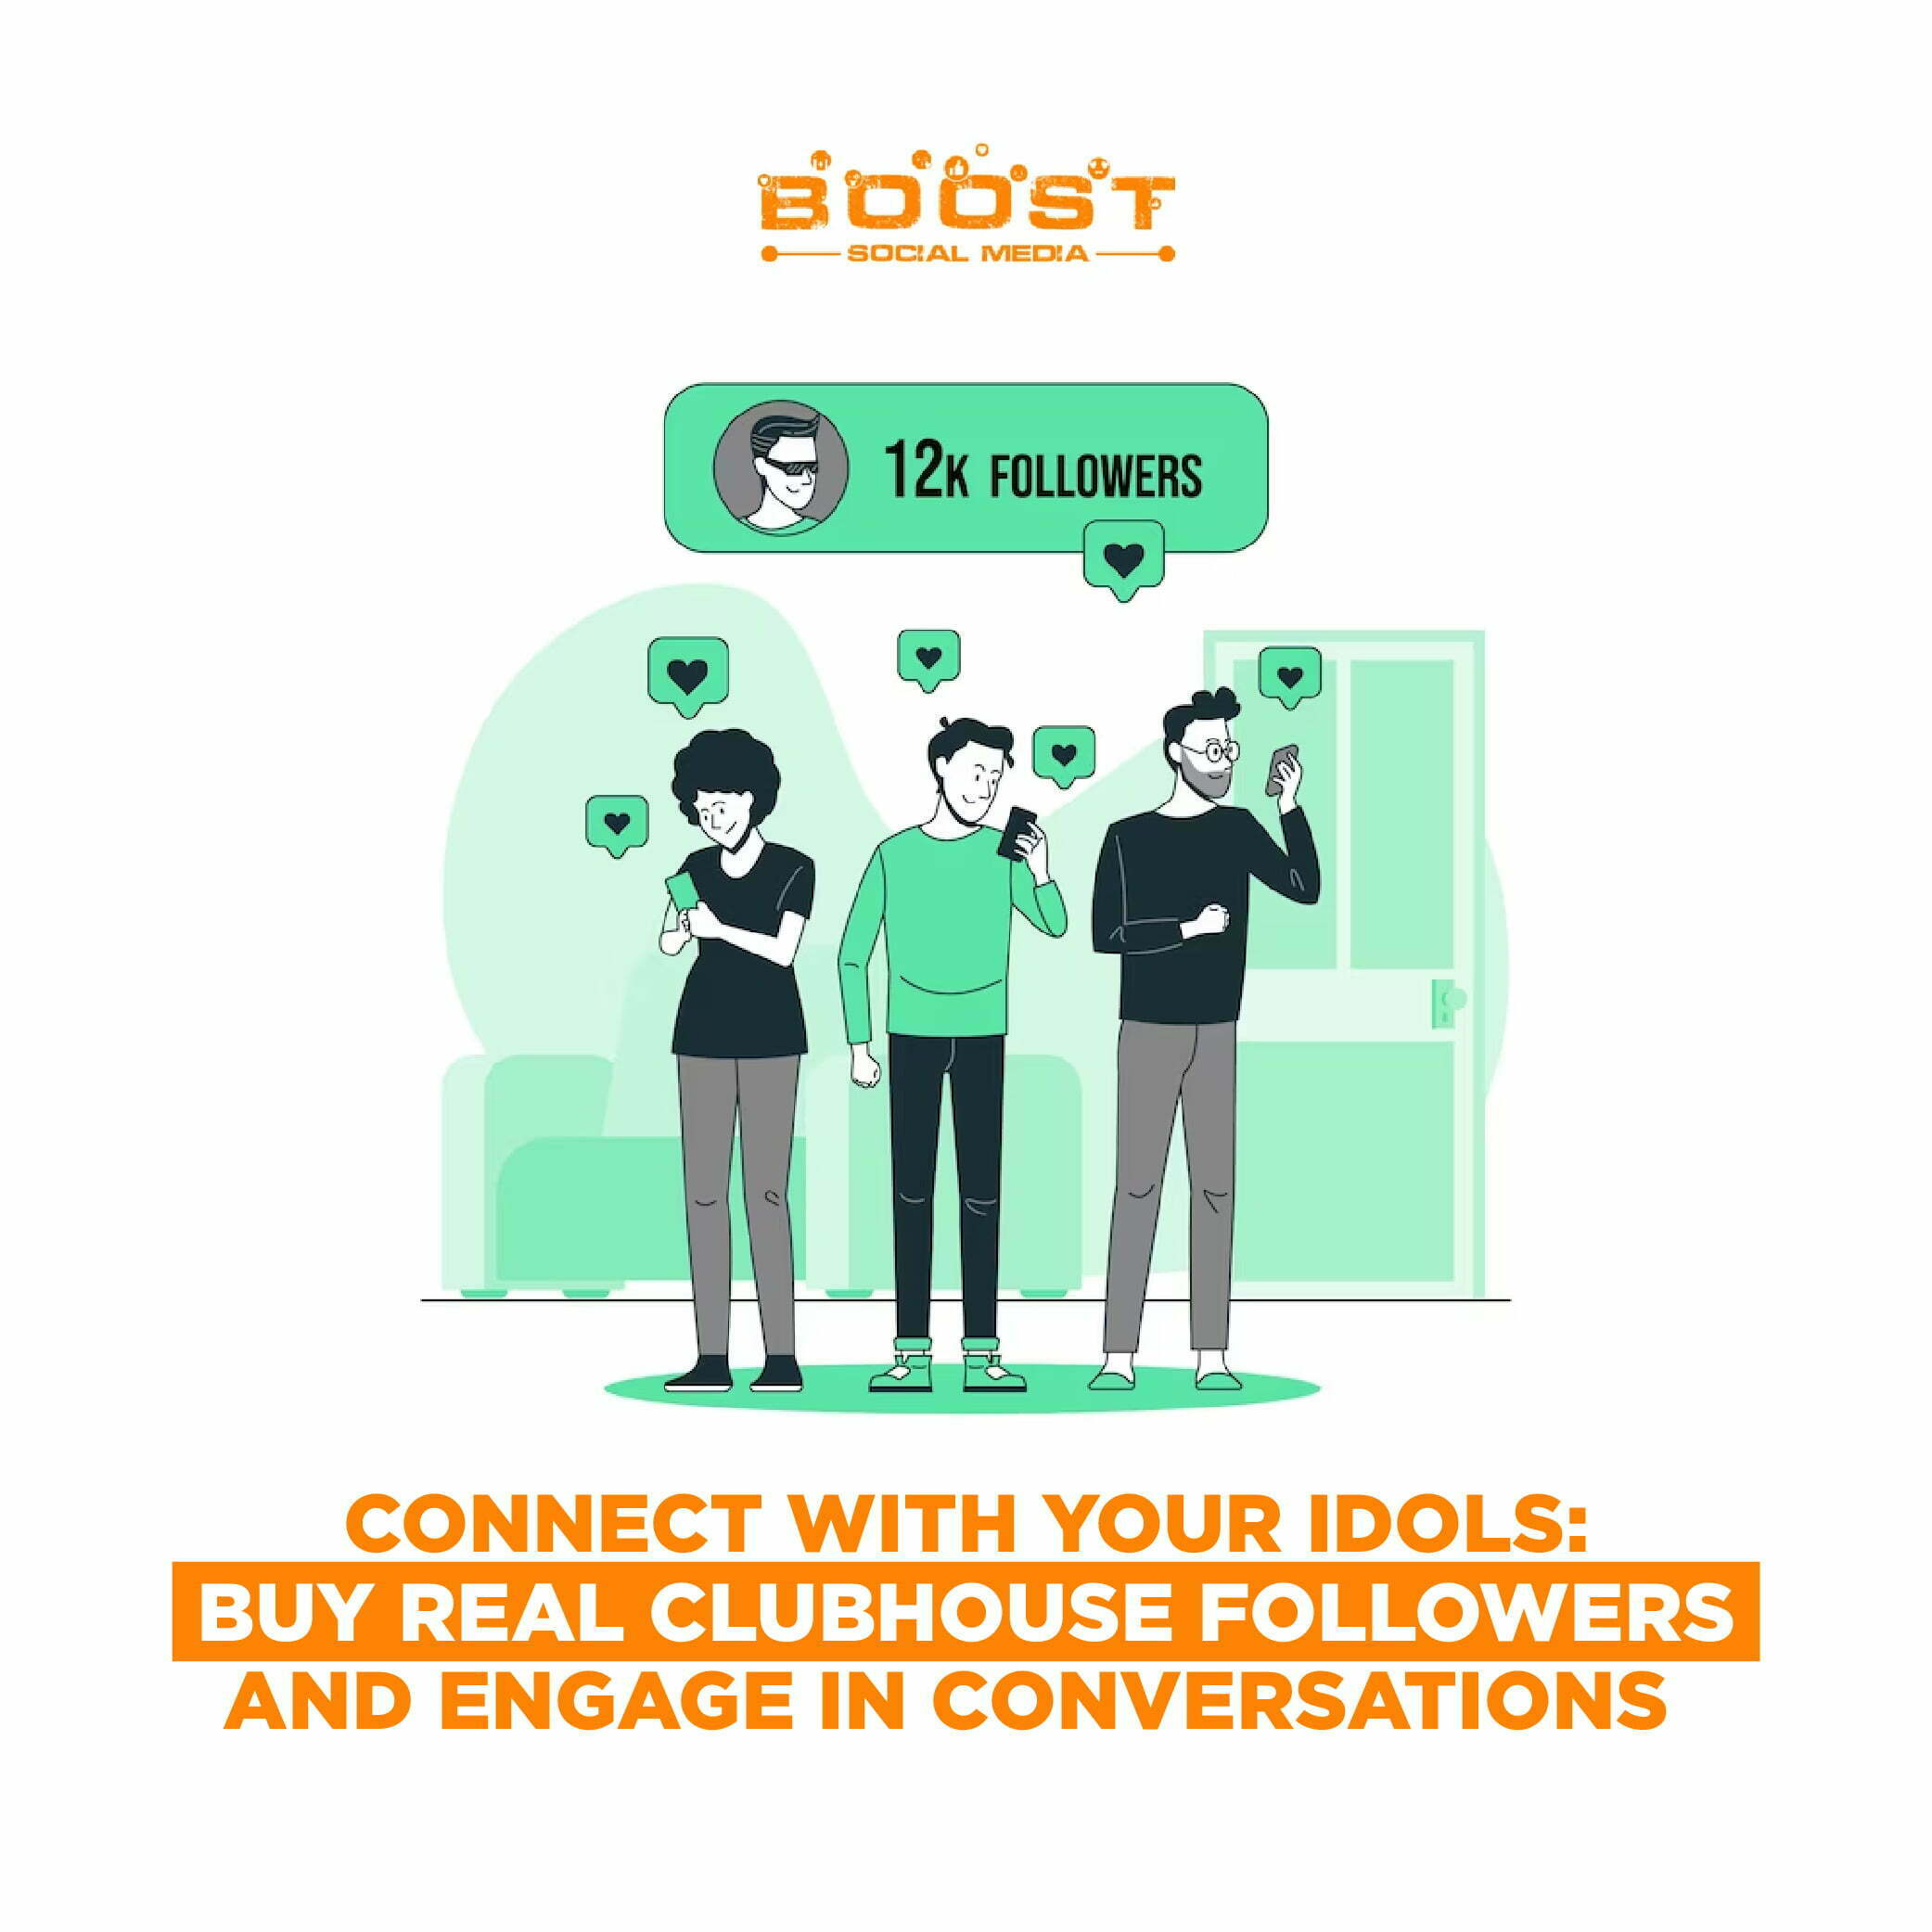 Connect with Your Idols Buy Real Clubhouse Followers and Engage in Conversations